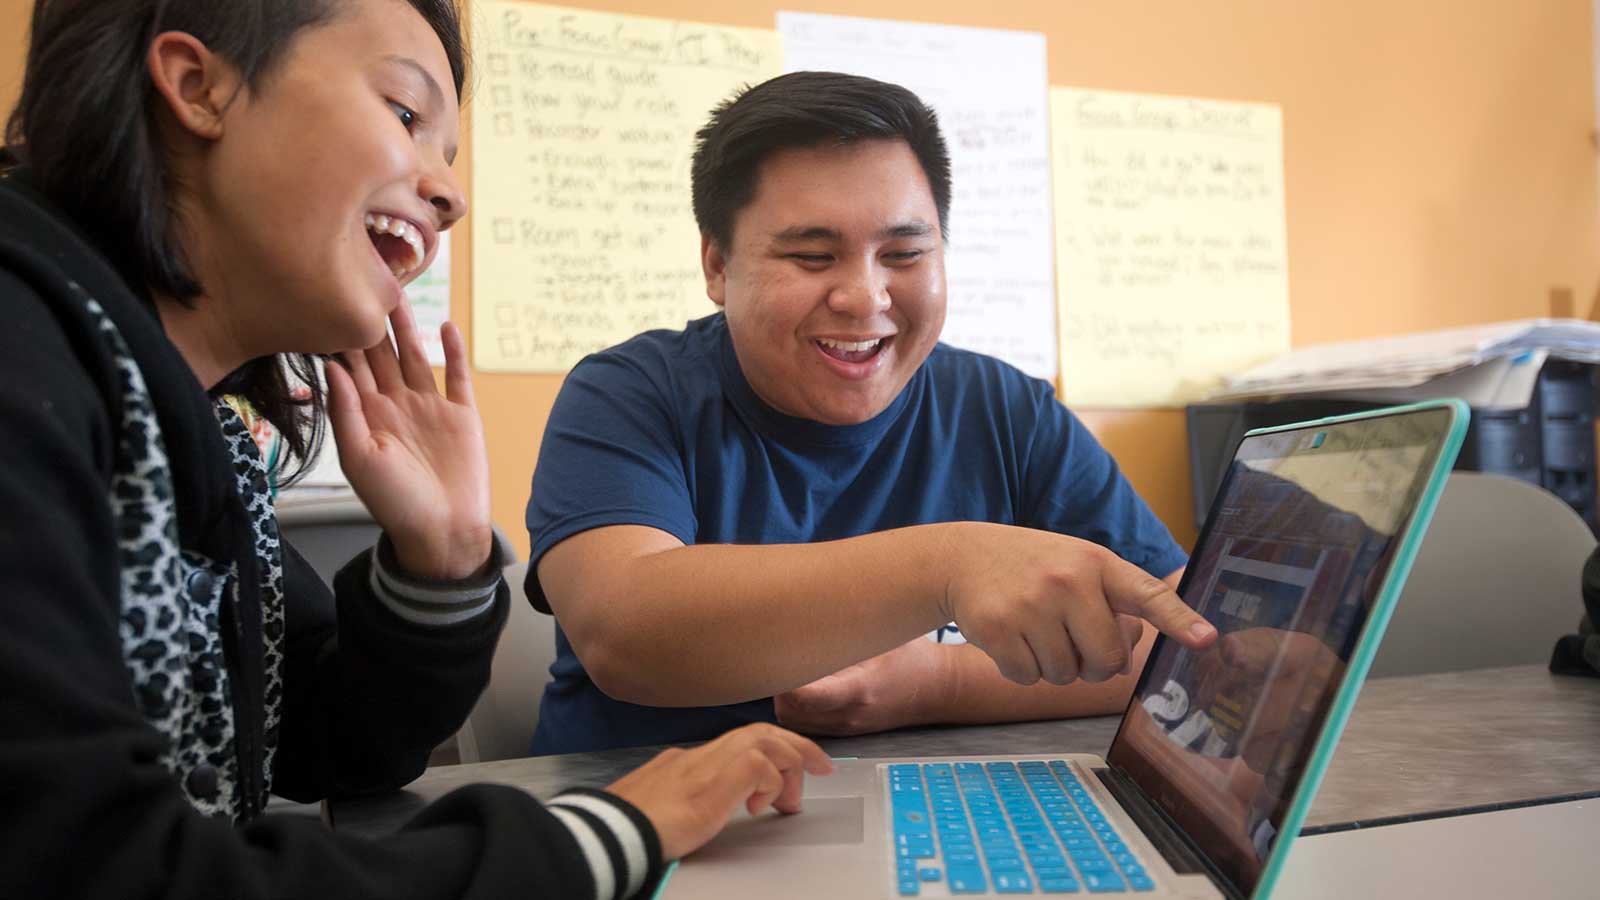 Young woman and man laughing as he points to a computer screen